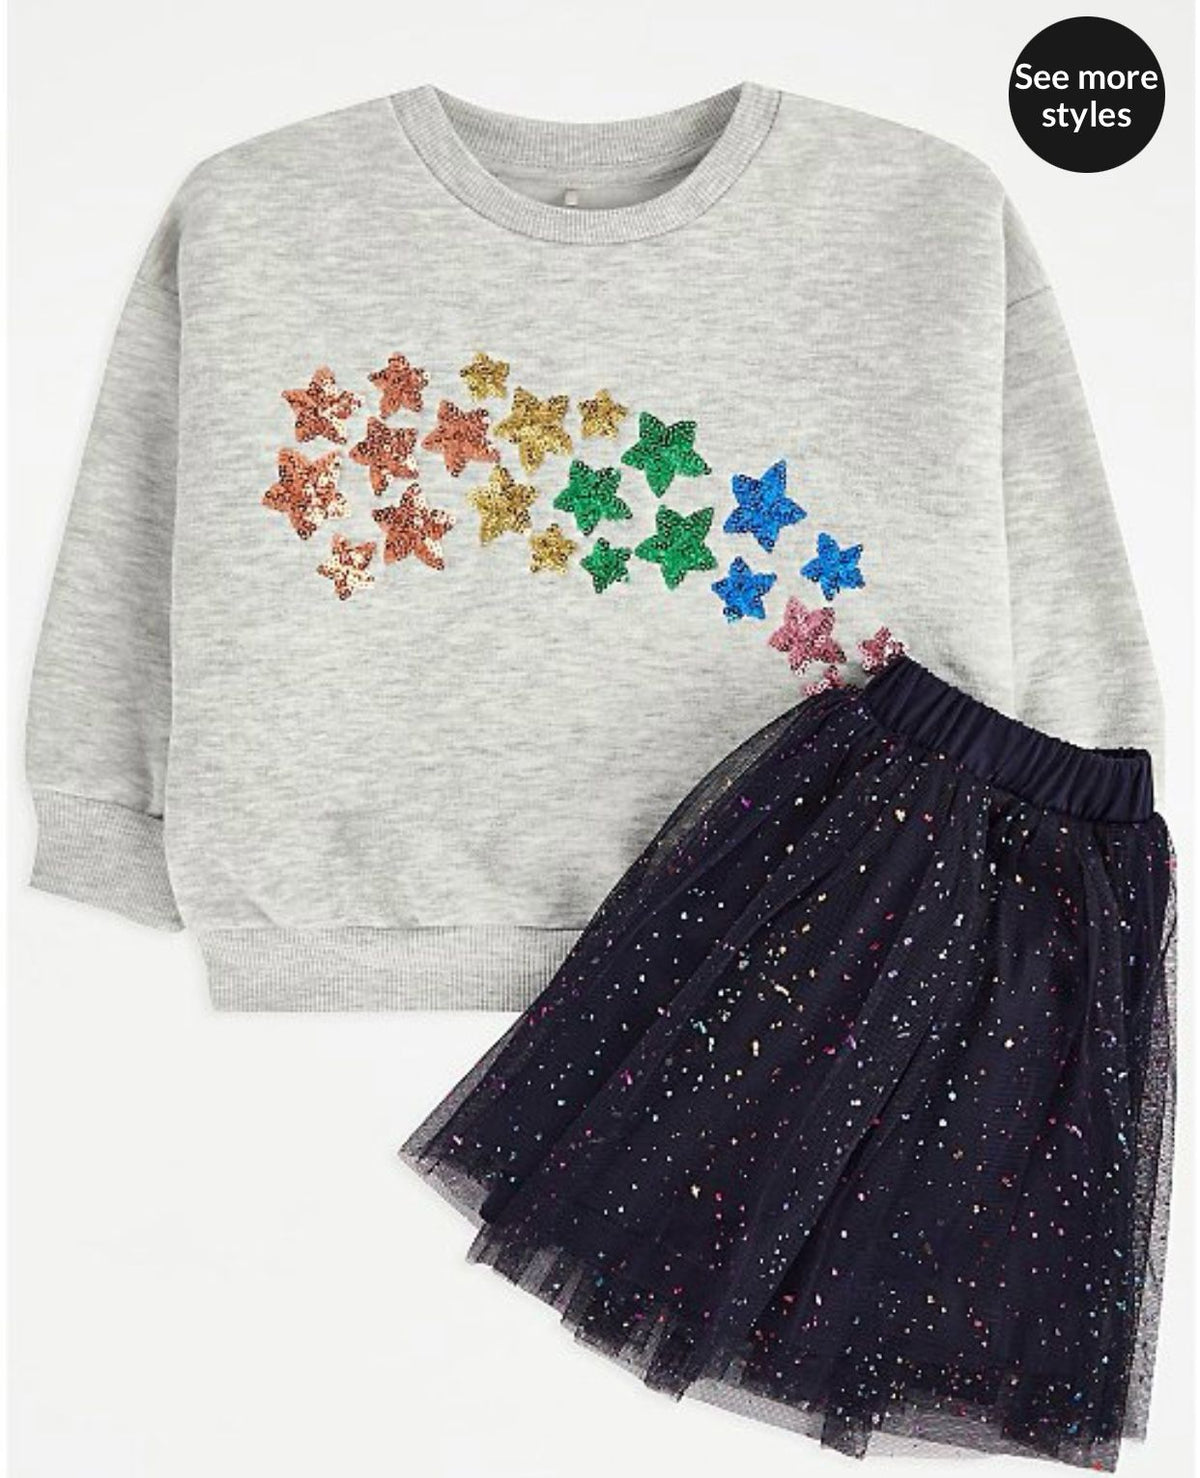 Glittery star outfit